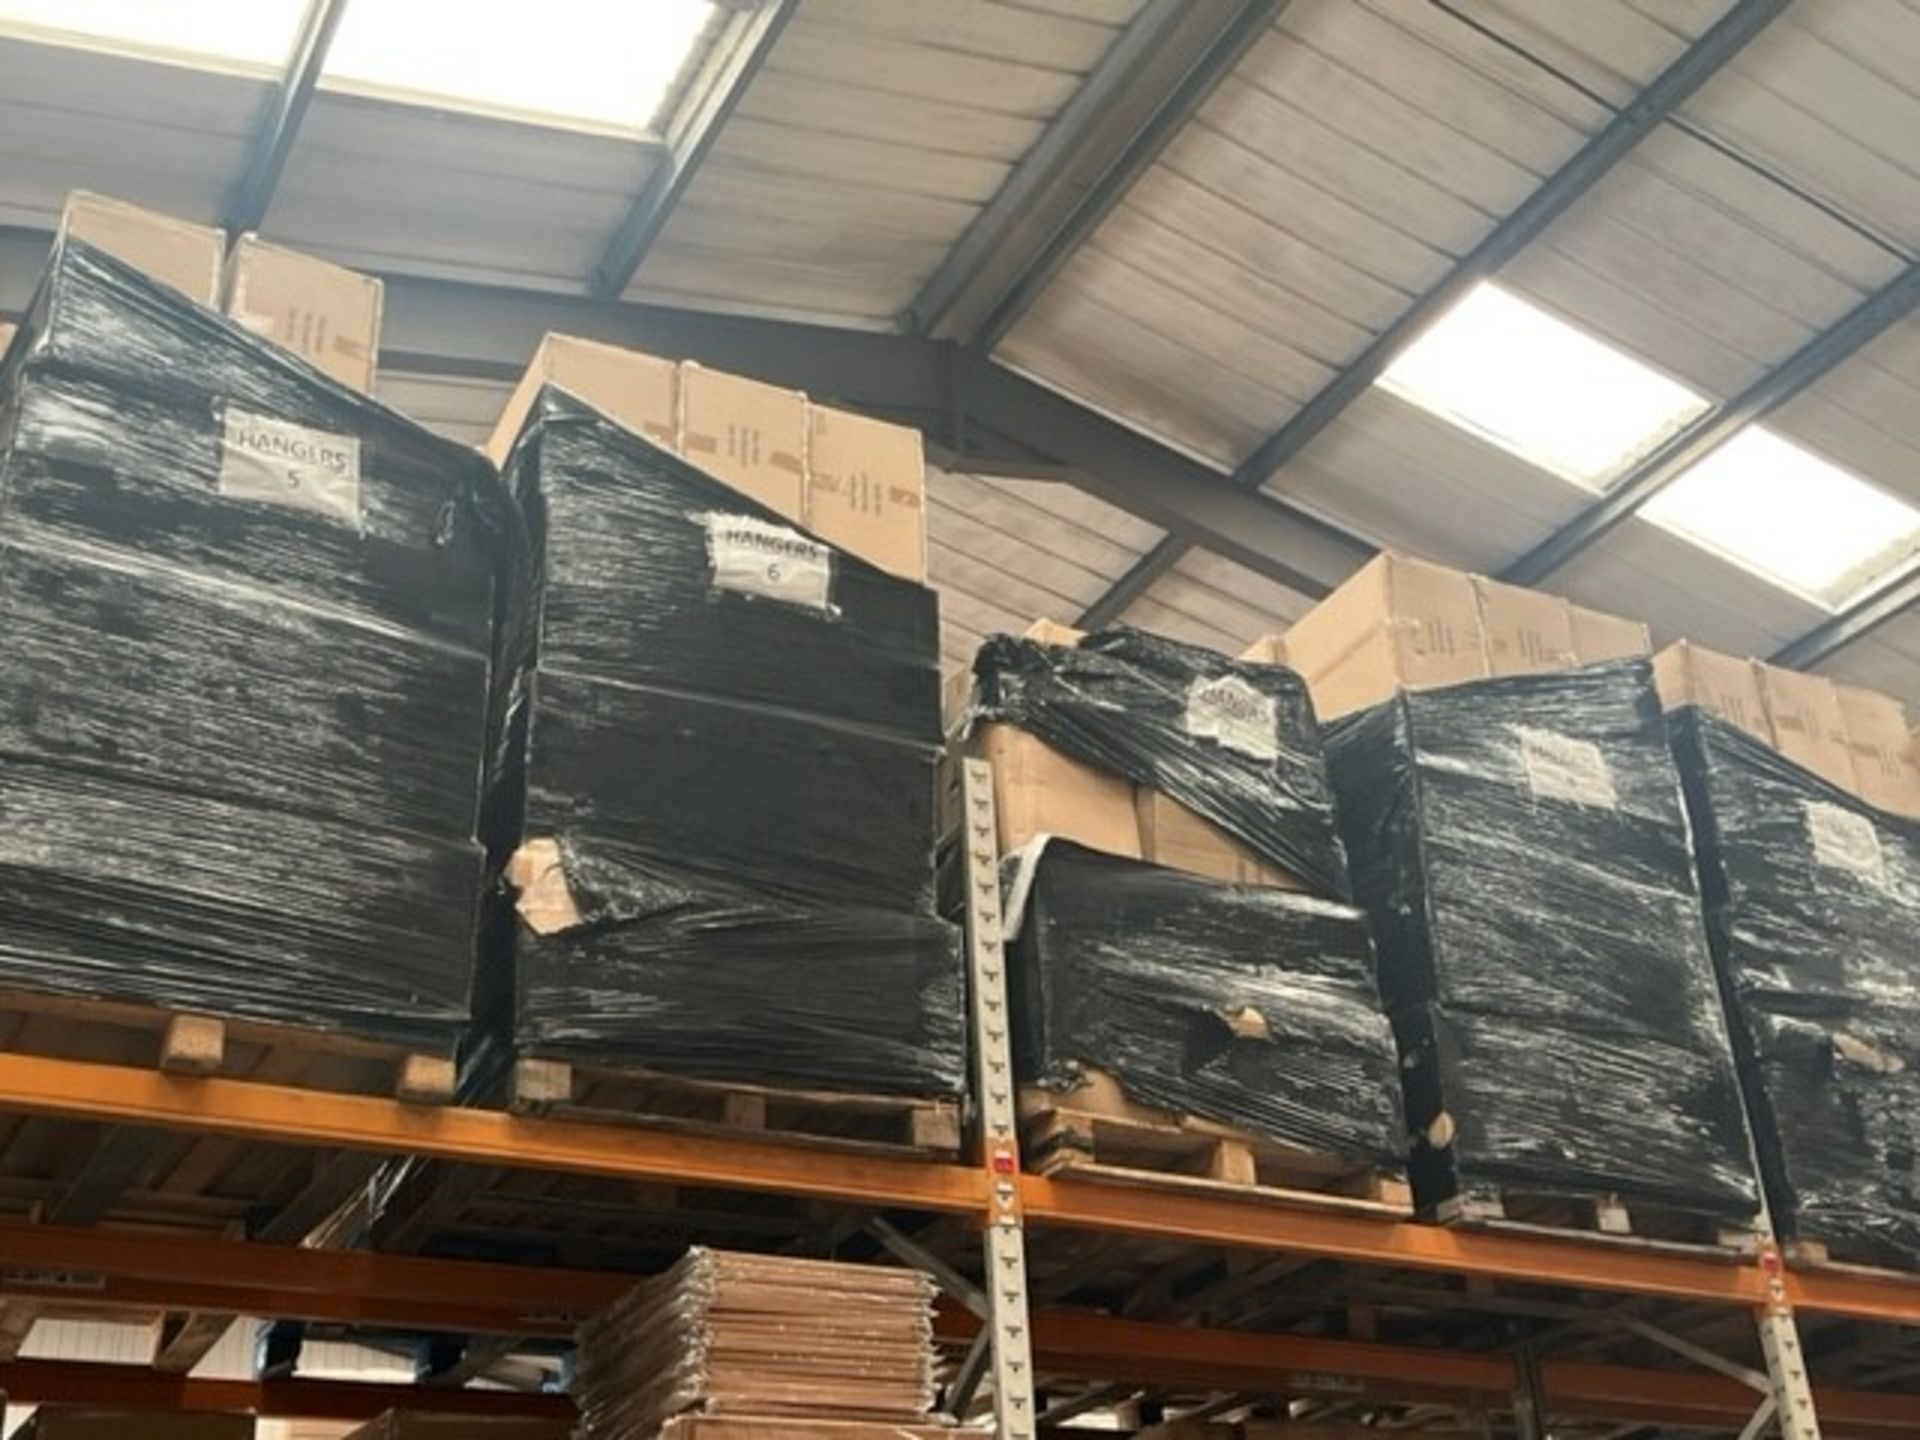 1 PALLET OF 2800 X WOODEN SECURITY COATHANGERS DARK WOOD WITH METAL BAR & SKIRT CLIPS - Image 4 of 4